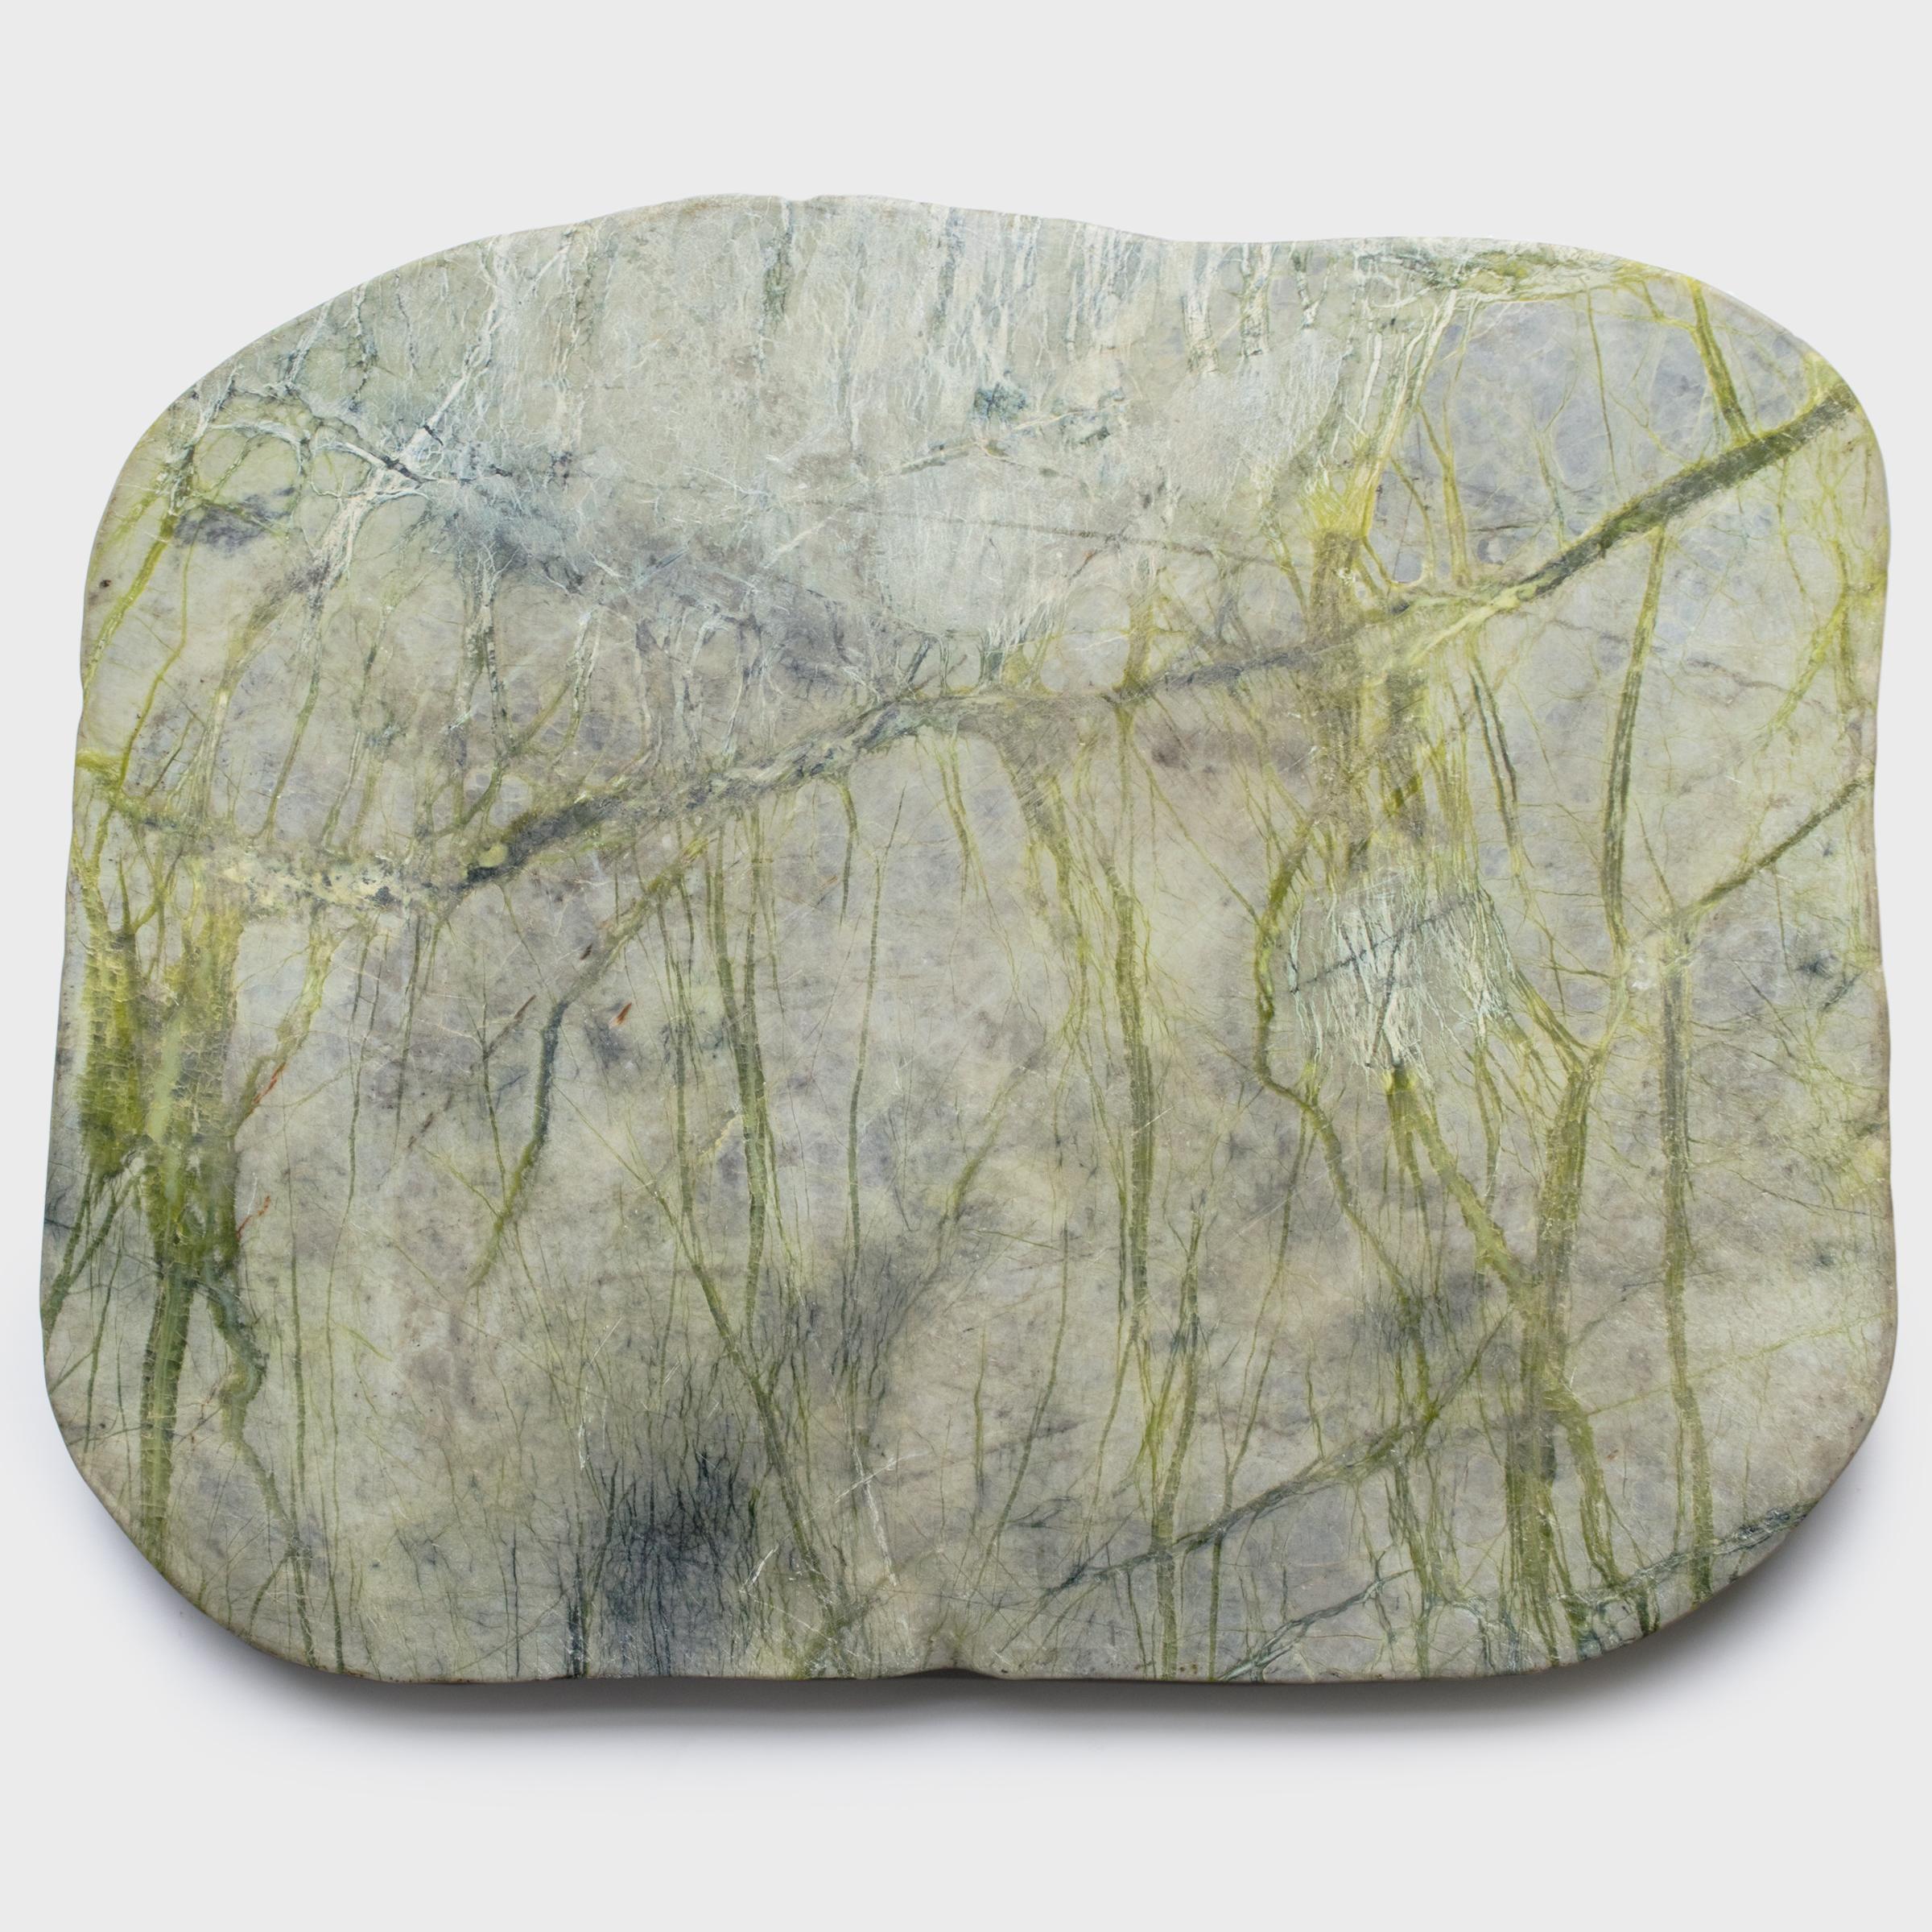 Found in China’s Liaoning province, greenery stones are named for the naturally occurring patterns suggestive of trees, grass and other plantlike forms that result from the stone’s conglomerate mix of jadeite, moss agate, serpentine, among other